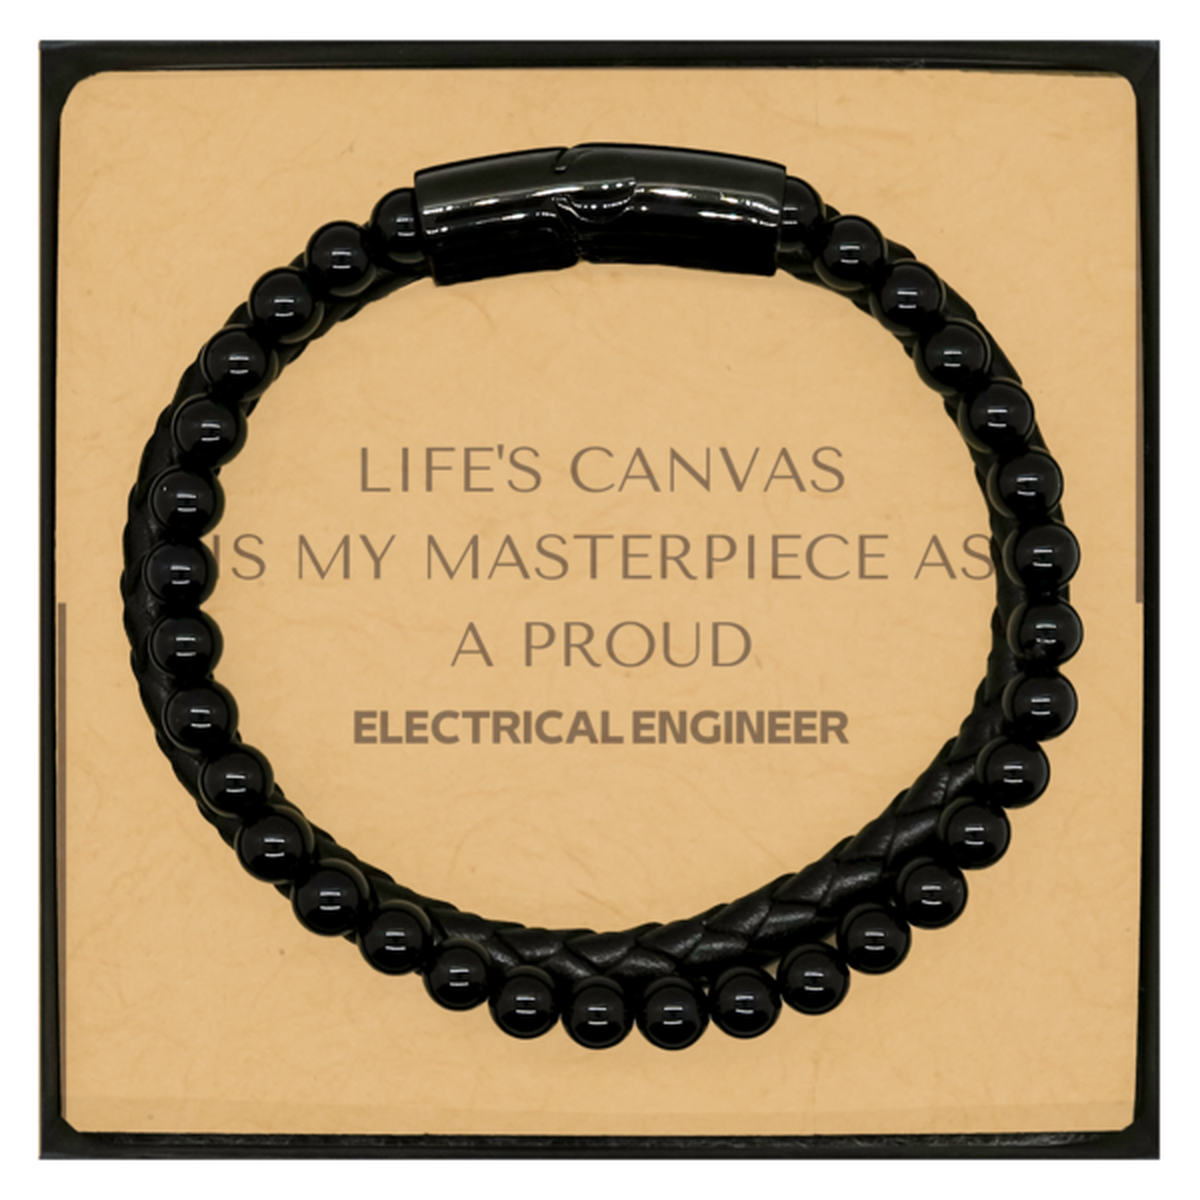 Proud Electrical Engineer Gifts, Life's canvas is my masterpiece, Epic Birthday Christmas Unique Stone Leather Bracelets For Electrical Engineer, Coworkers, Men, Women, Friends